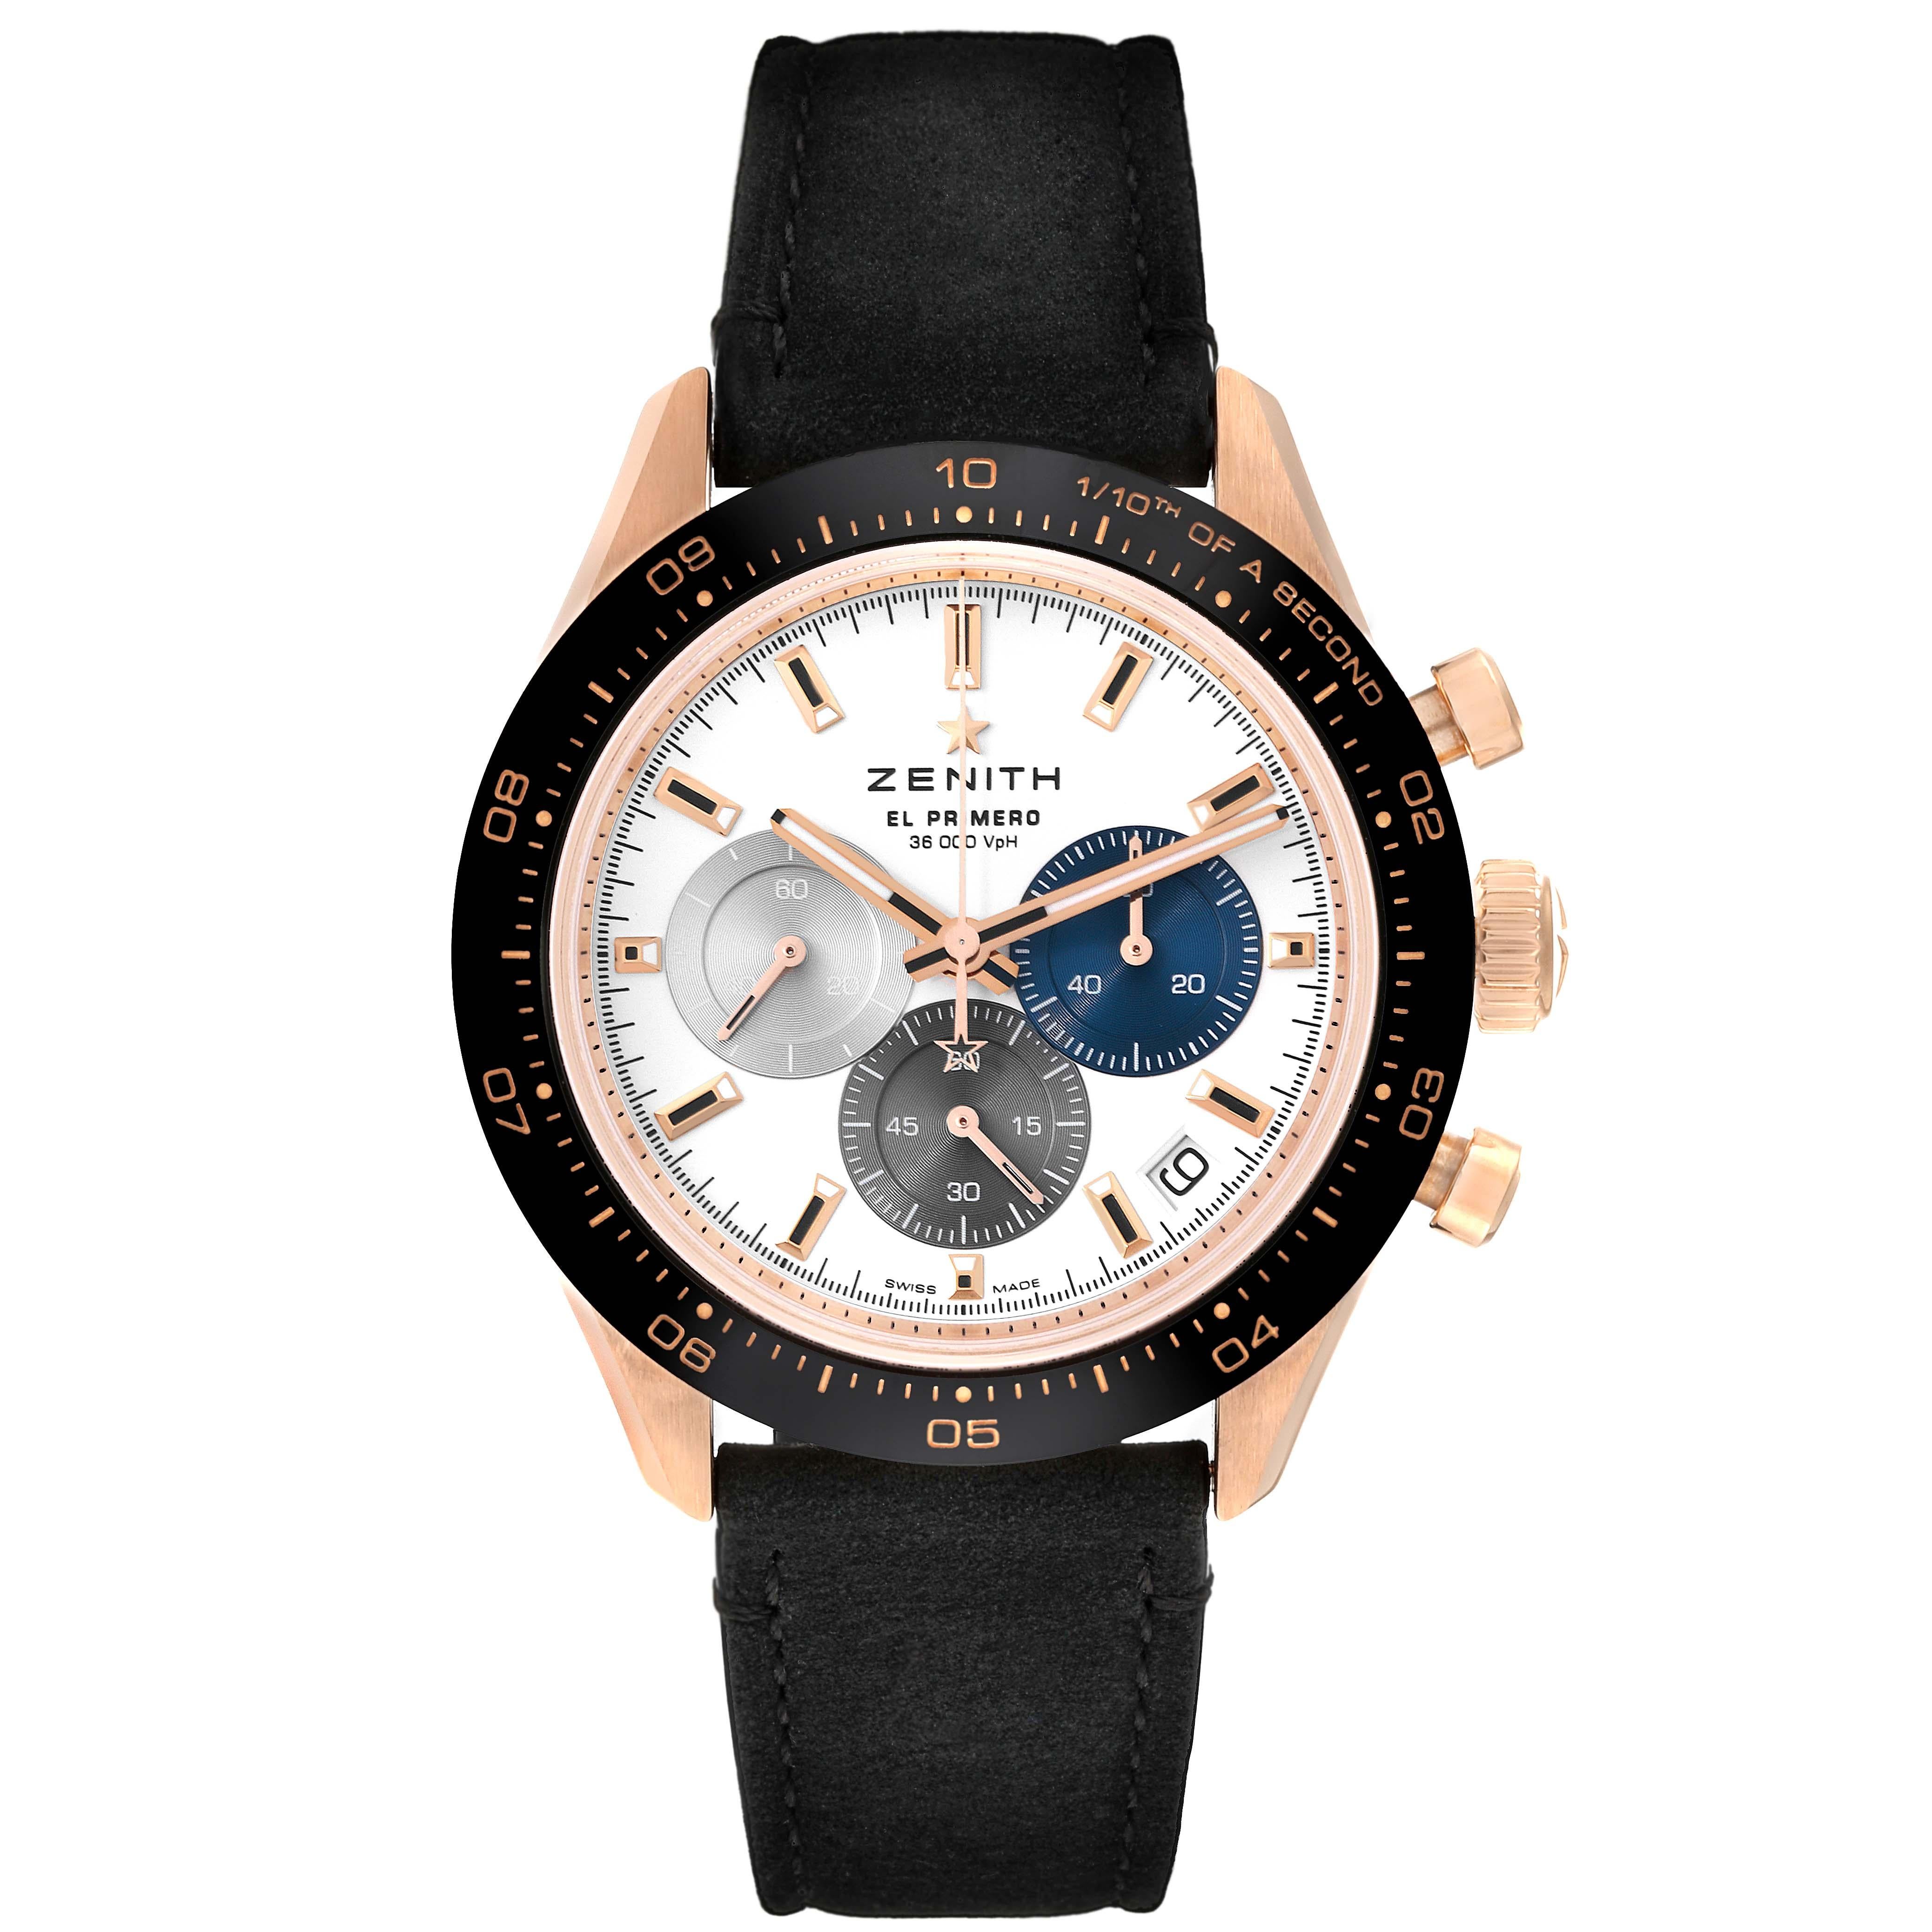 Zenith Chronomaster Sport Rose Gold Mens Watch 18.3100.3600 Unworn. In-house Zenith El Primero self-winding automatic 1/10th of a second chronograph movement. 18k rose gold case 41.0 mm in diameter. Chronograph pushers at 2 and 4 o'clock. Crown with